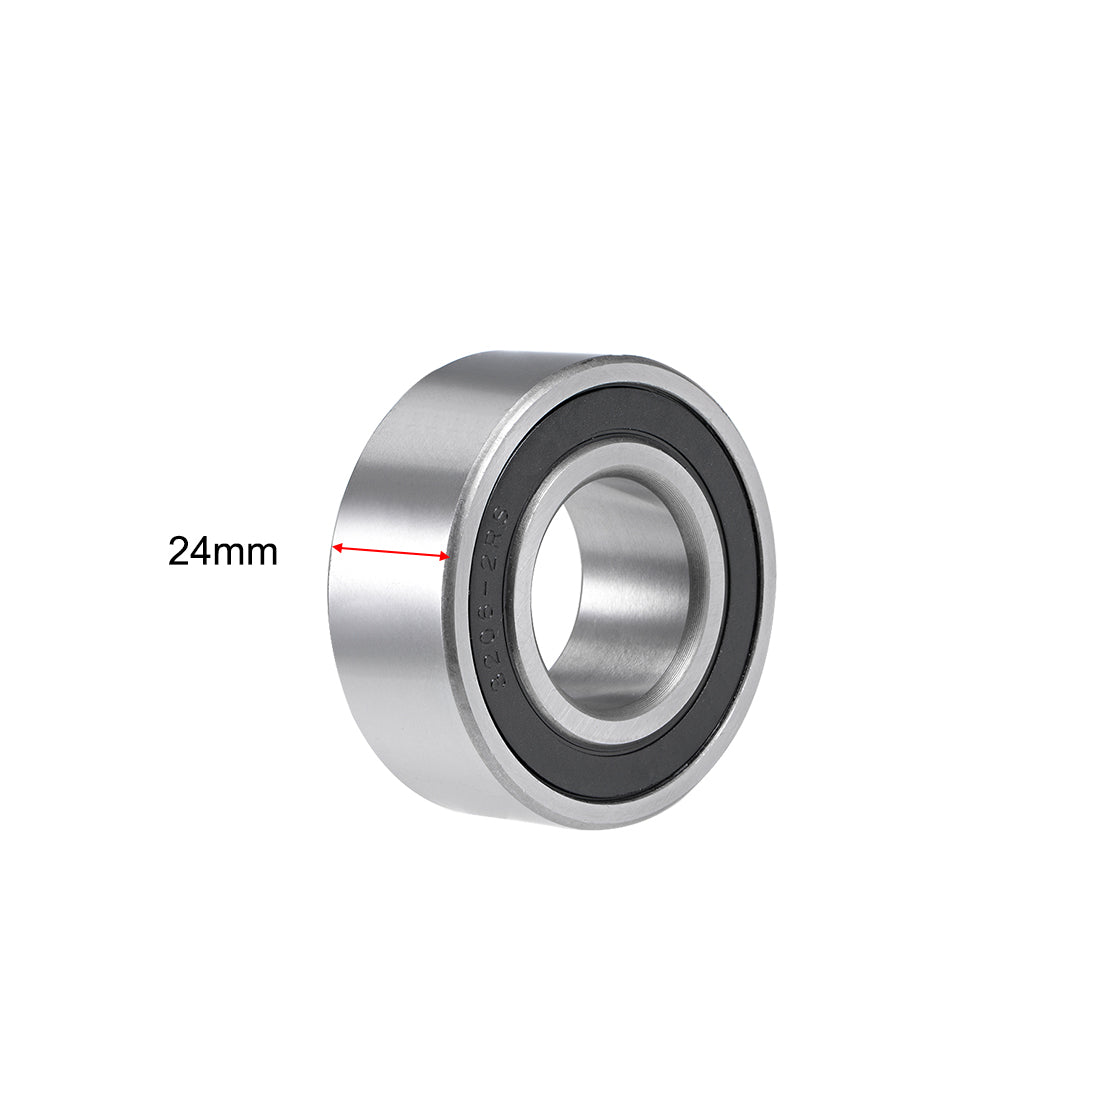 Uxcell Uxcell 3206-2RS Angular Contact Ball Bearing 30x62x24mm Sealed Bearings 5206-2RS 2pcs